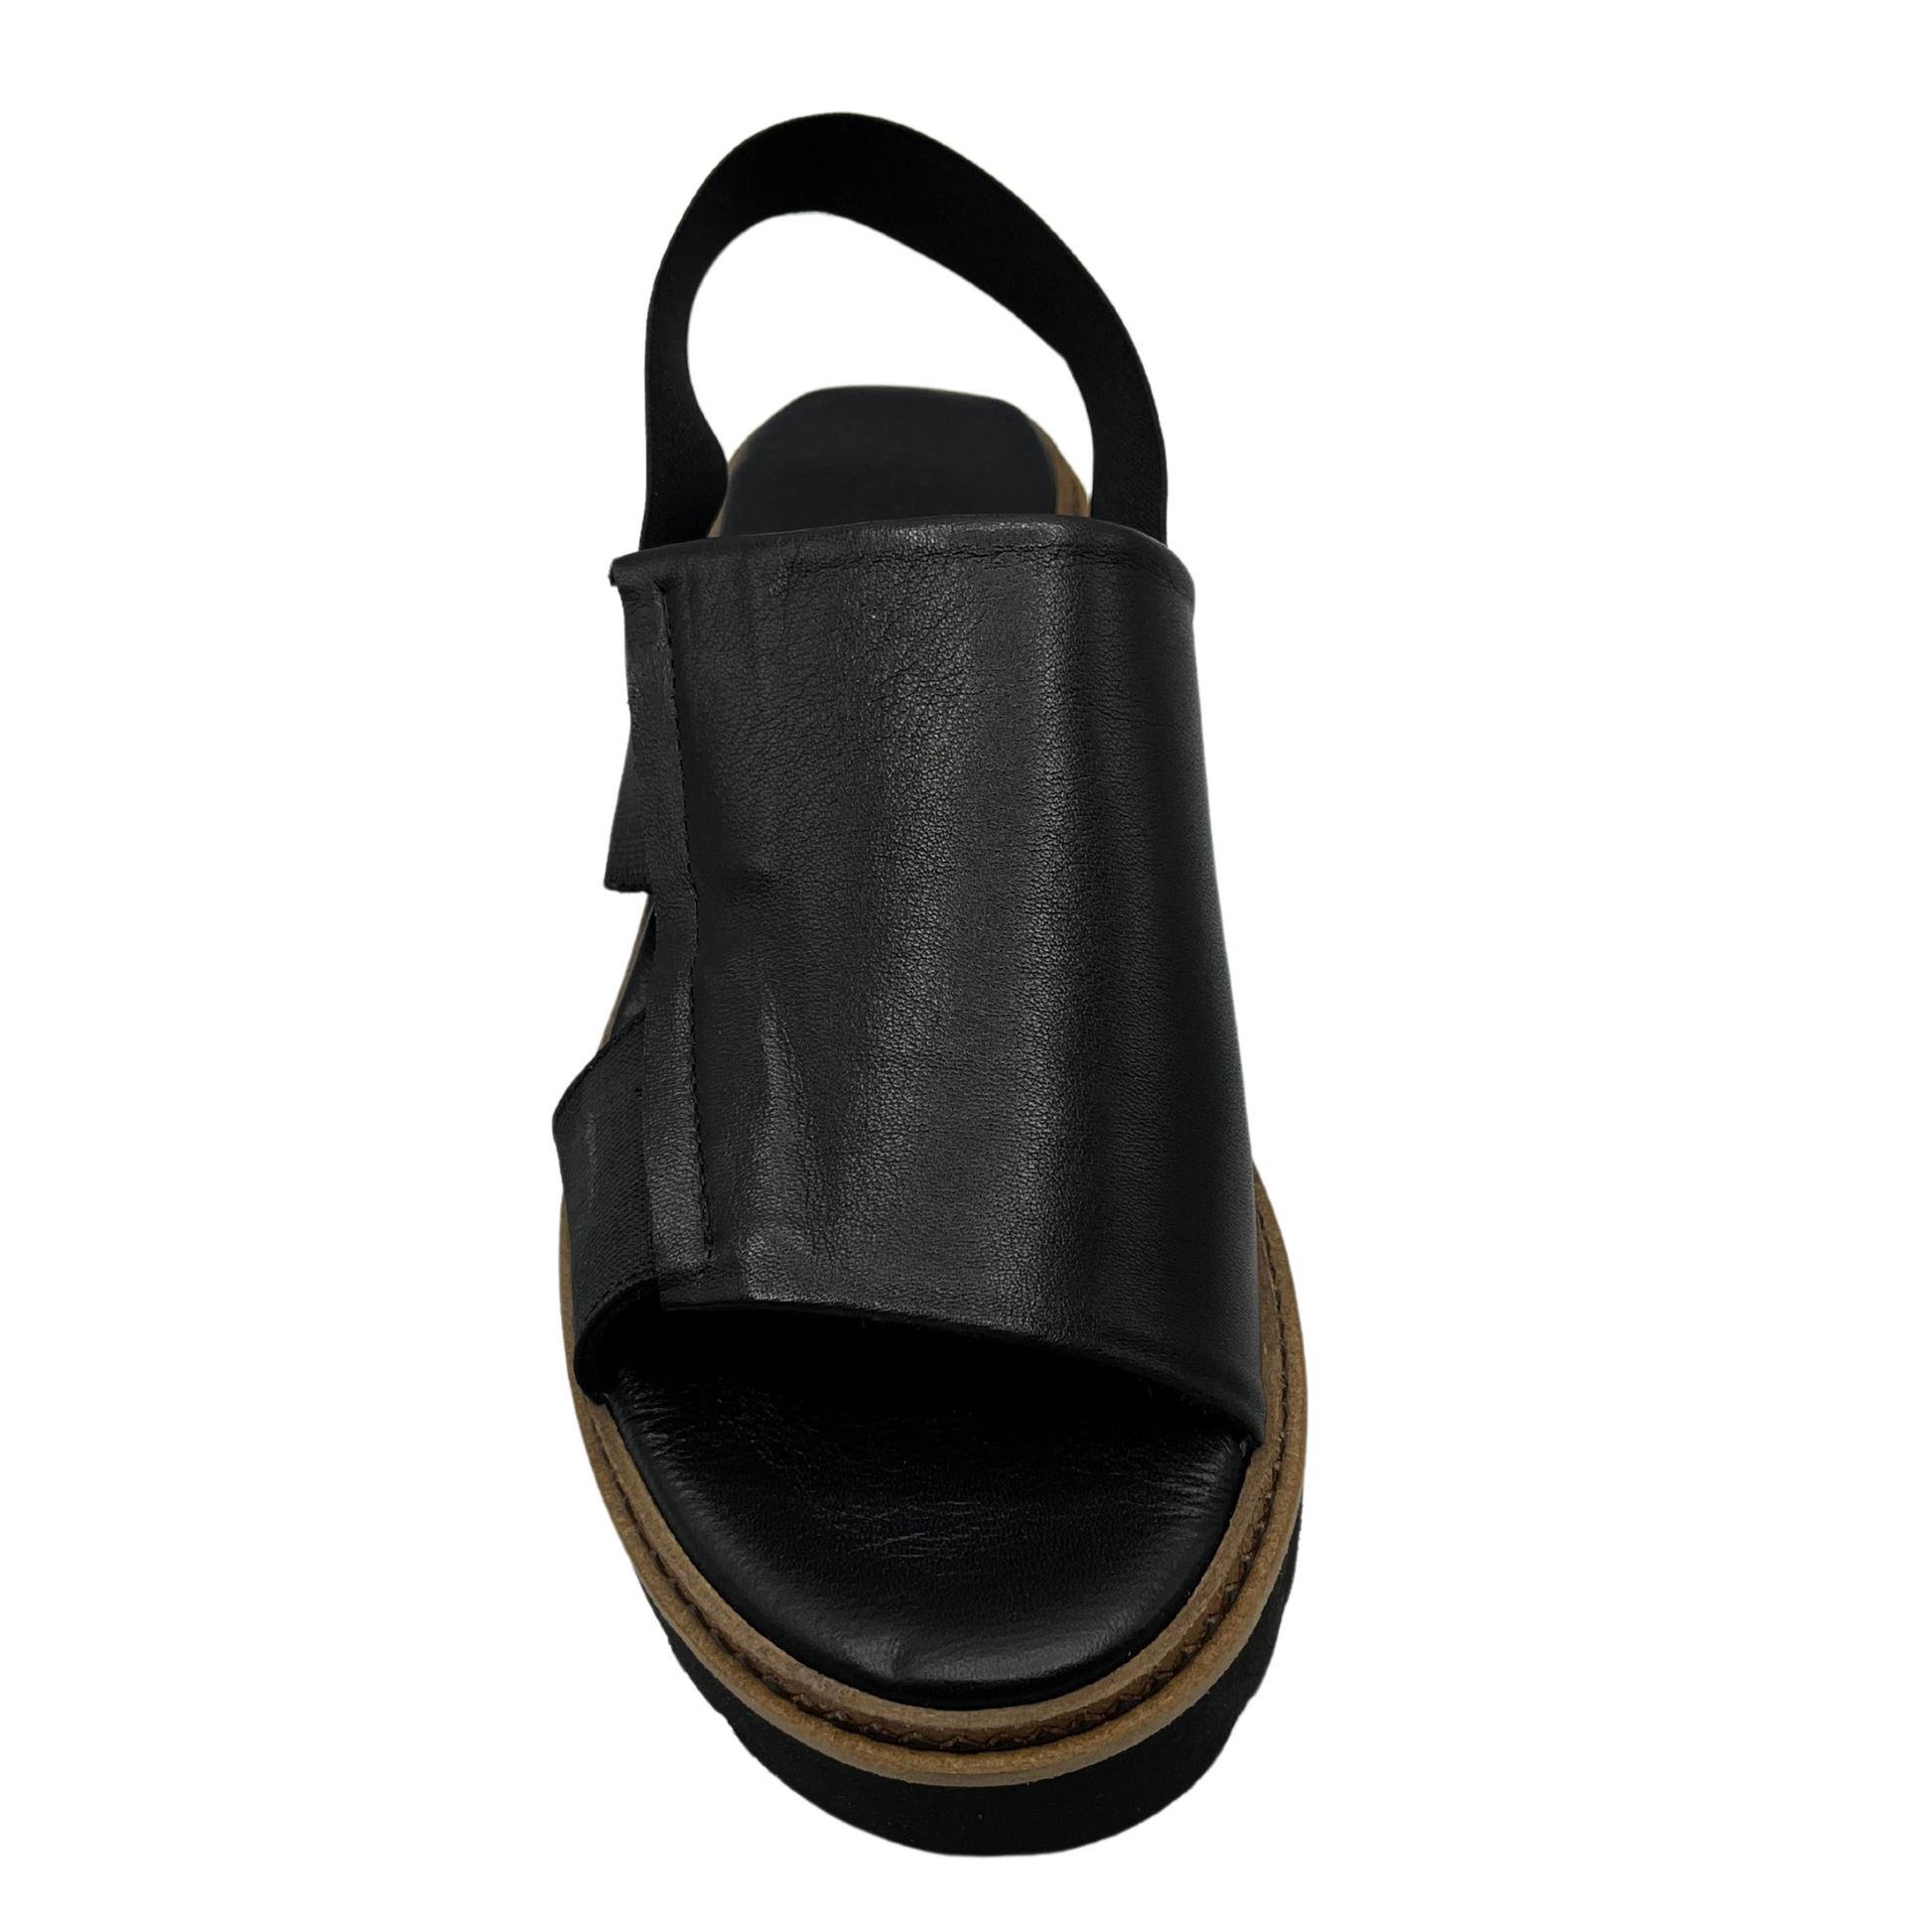 Top down view of black slip on sandal with elastic strap and rounded toe